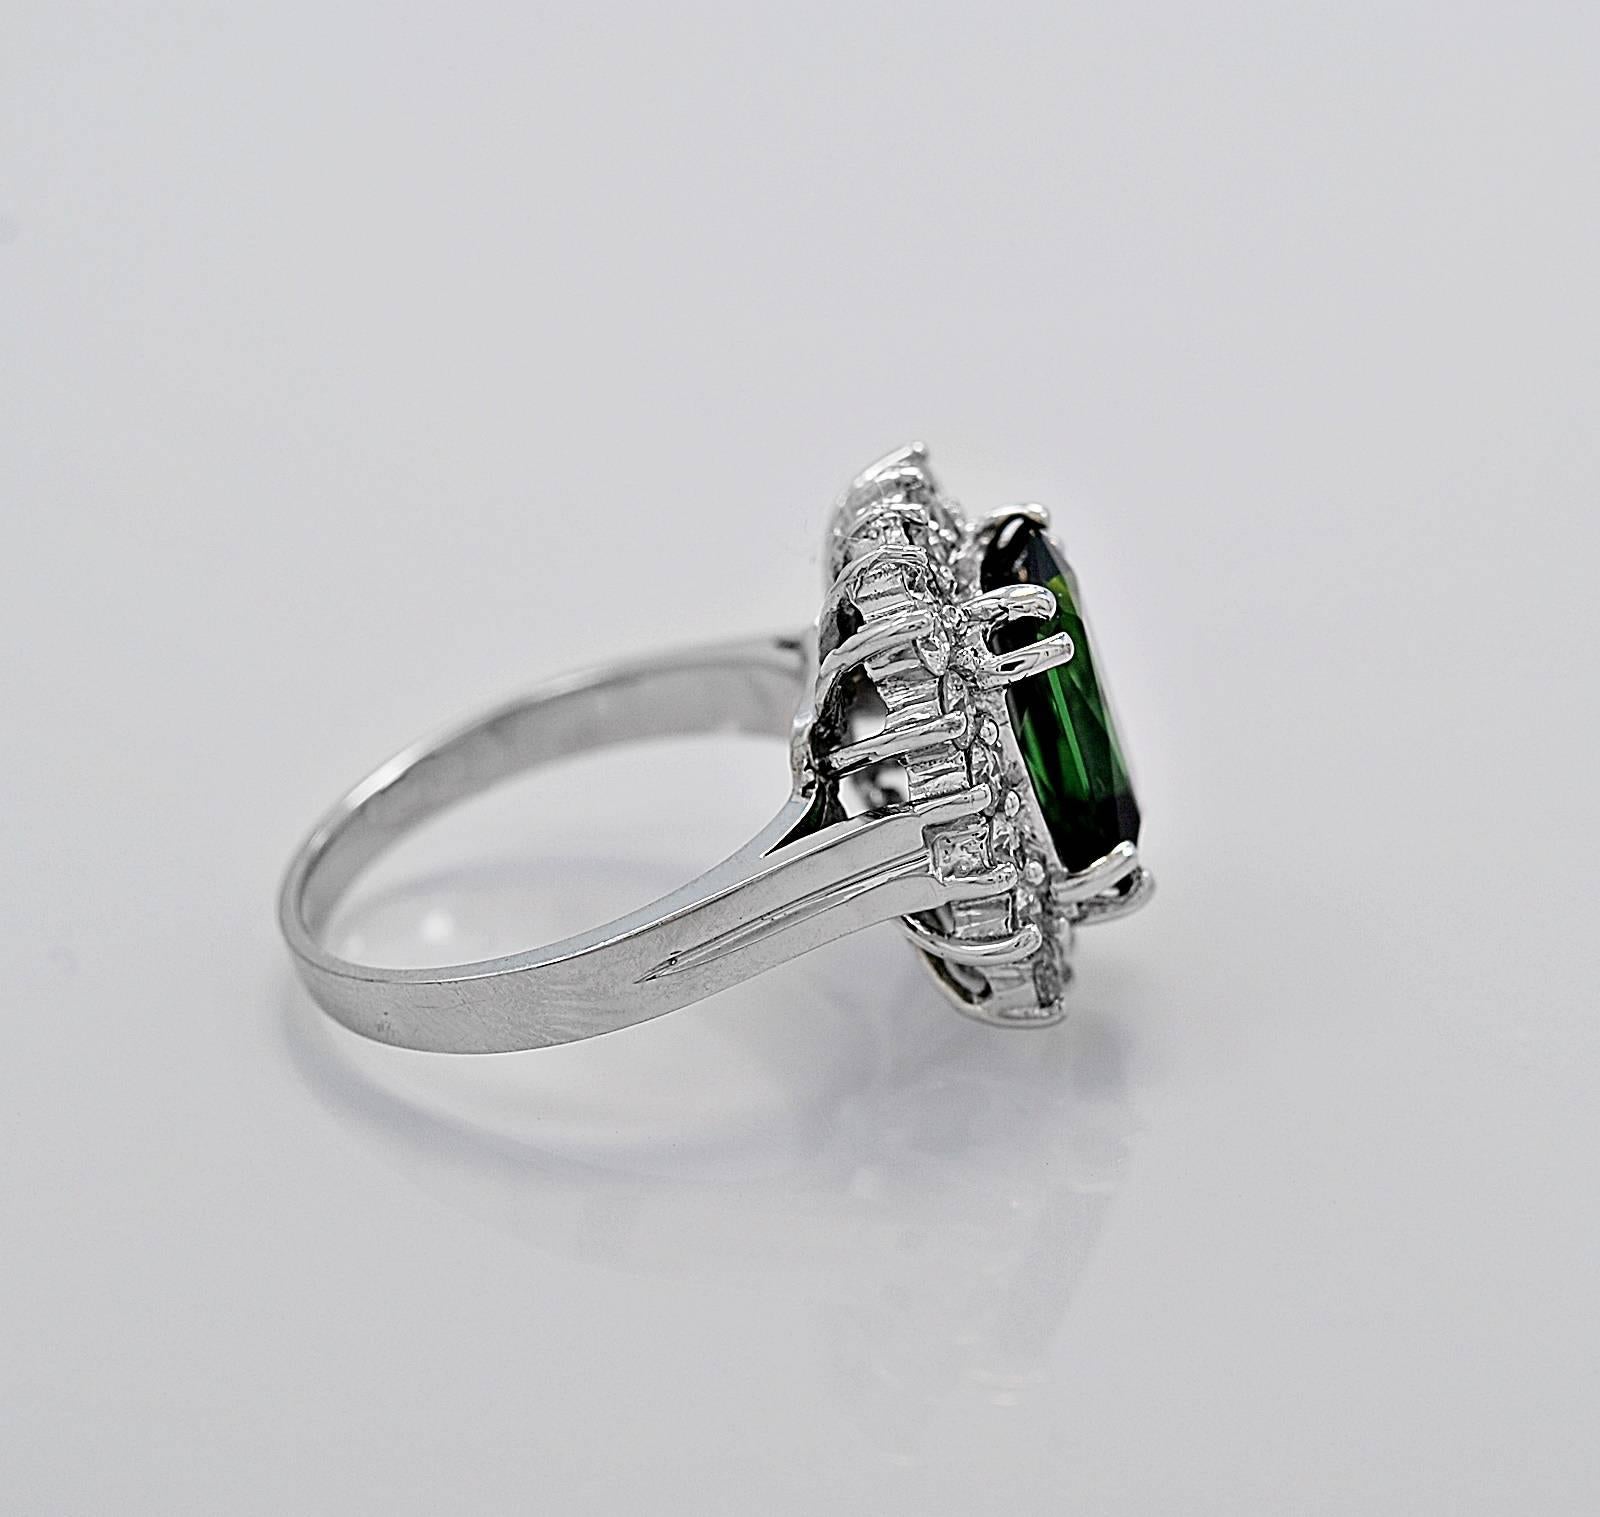 A beautiful estate fashion ring featuring a 3.50ct. apx. rectangular cushion cut tourmaline surrounded by 1.00ct. apx. T.W. of round brilliant diamonds. This impressive ring would be an excellent addition to your jewelry wardrobe!

Primary